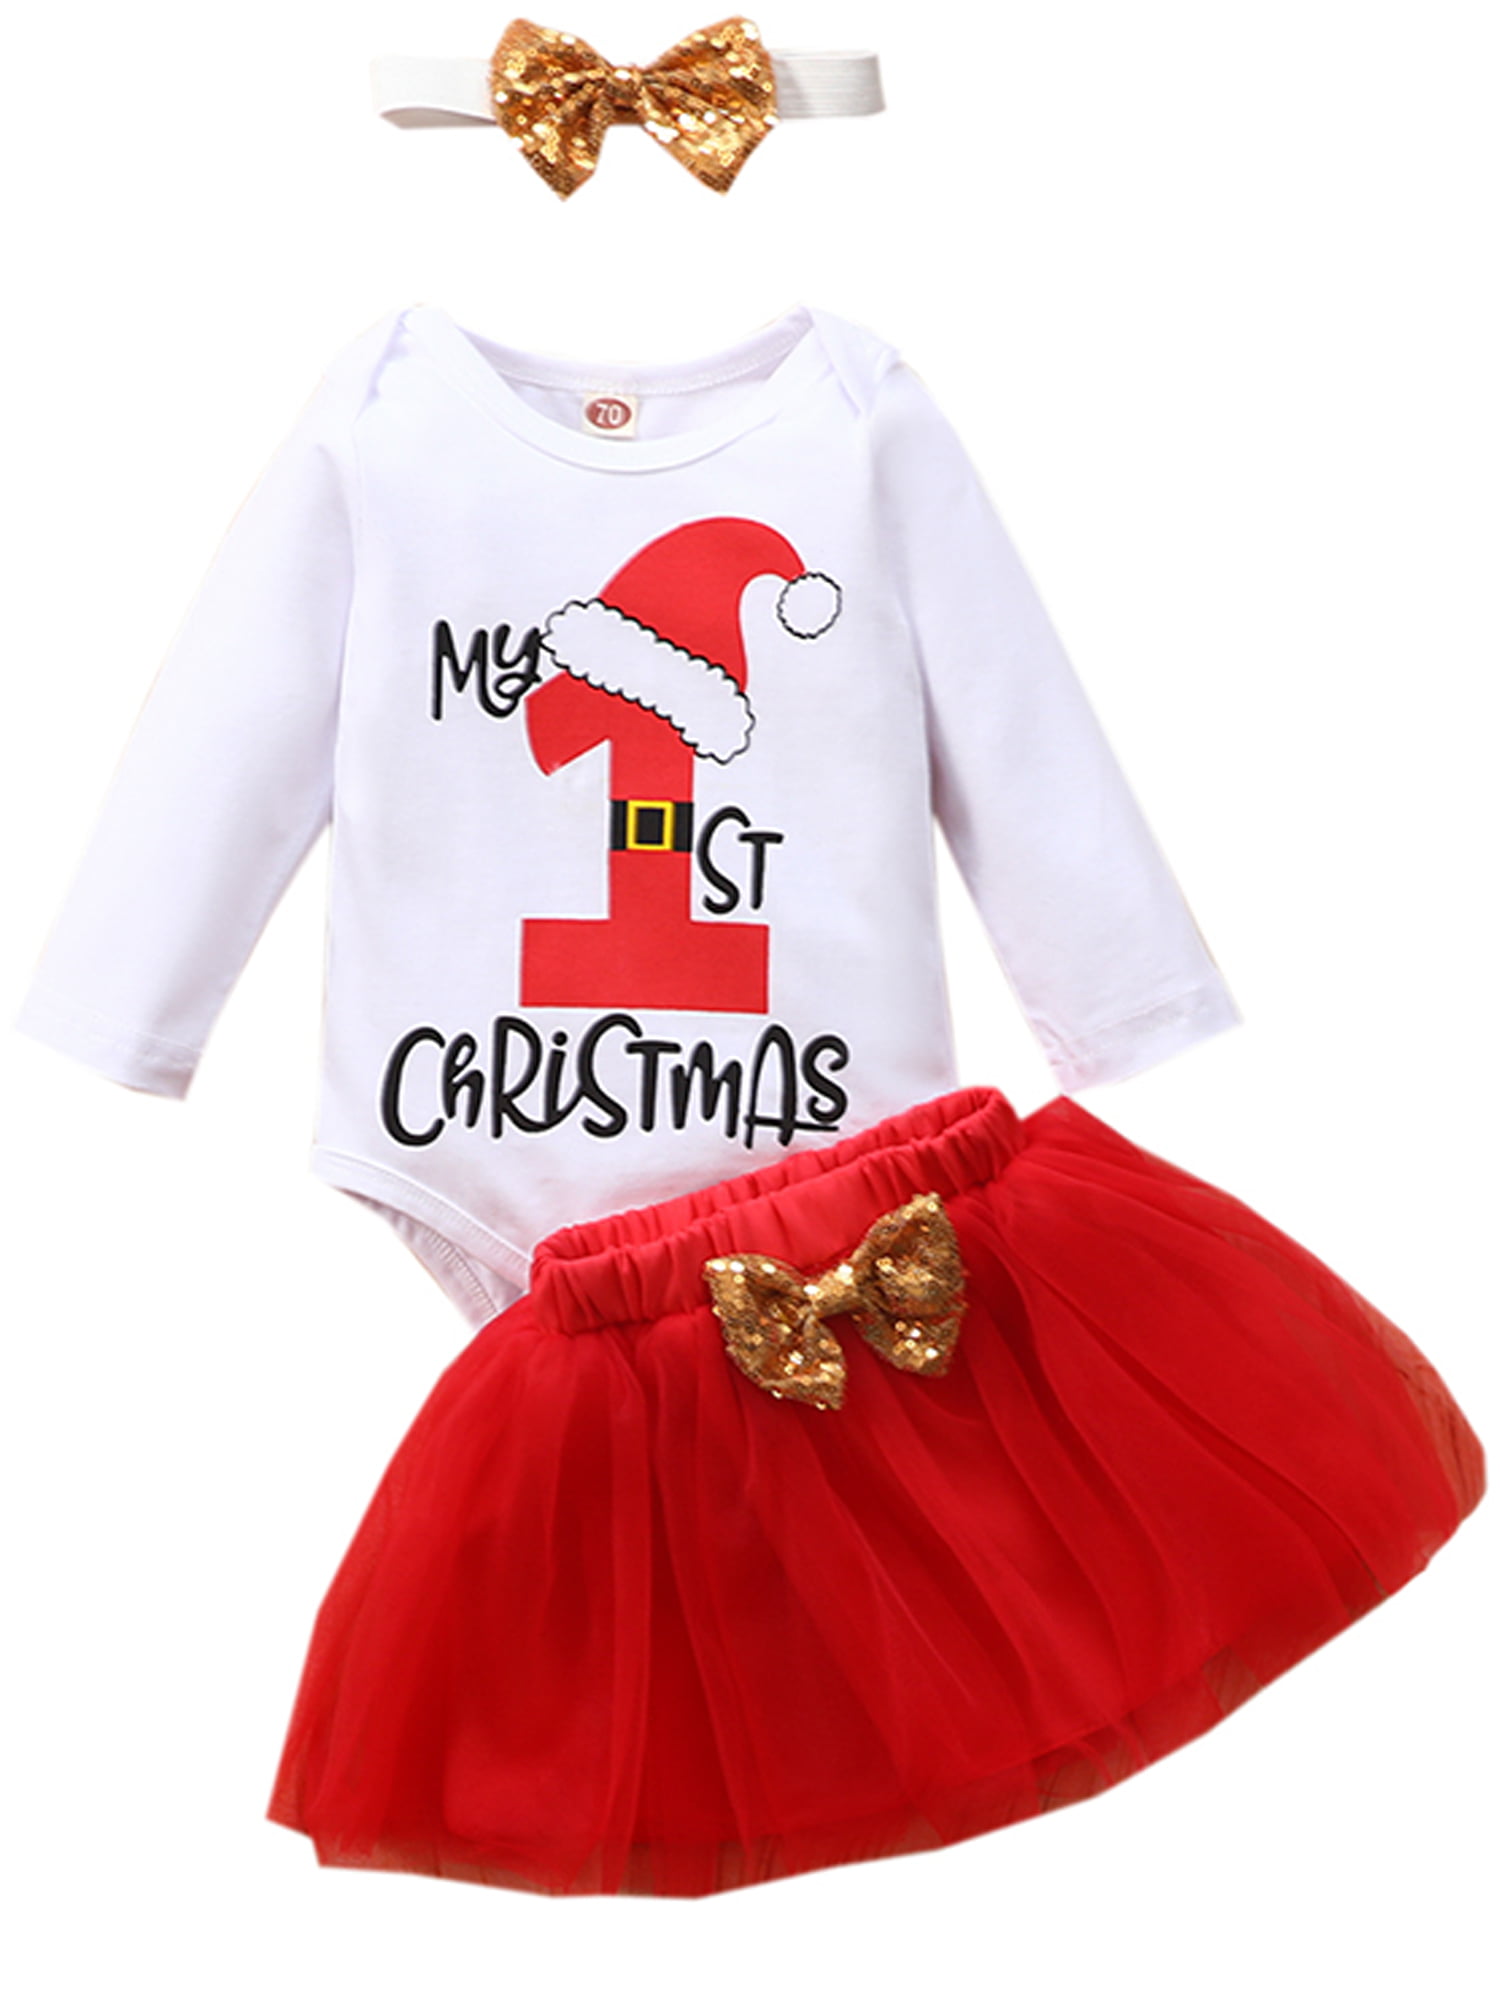 Christmas Newborn Clothes Infant Baby Girls My 1st Christmas Romper Dot Tutu Skirt Bow Sequins 3Pcs Outfits Set